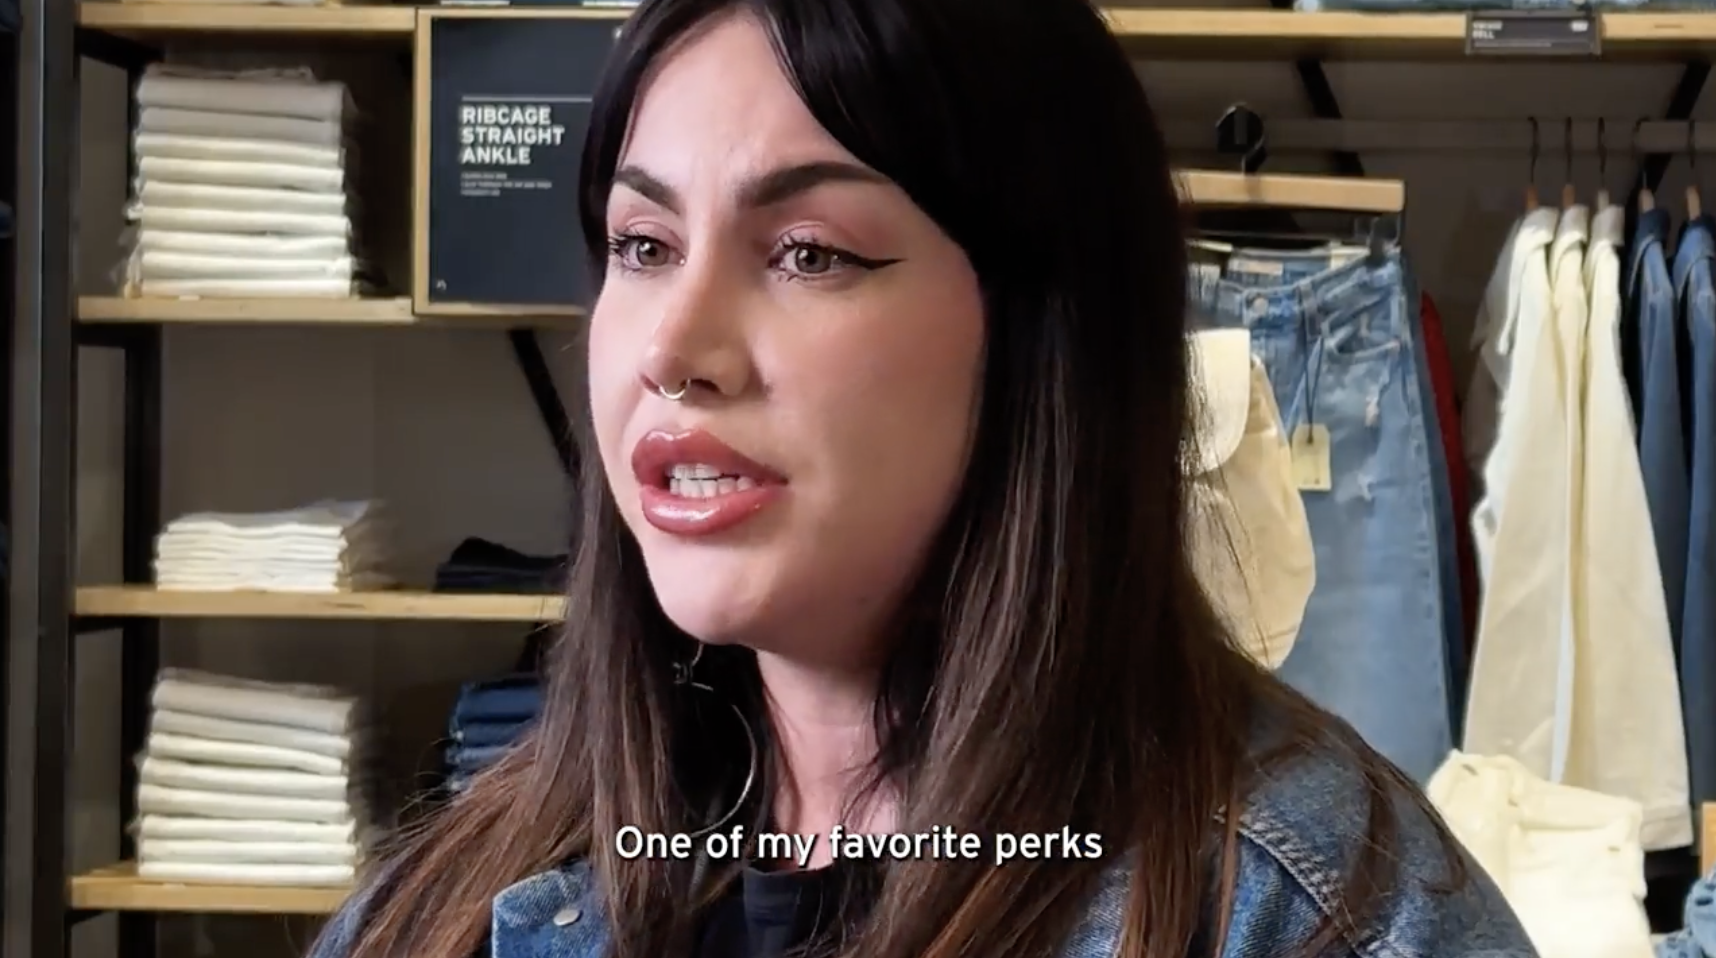 A close up of Kaitlyn Fernandez, assistant store manager for the Levi's® brand, mid speech. She is inside a Levi's® store in front of a shelf of Levi's® jeans and a text caption reads 